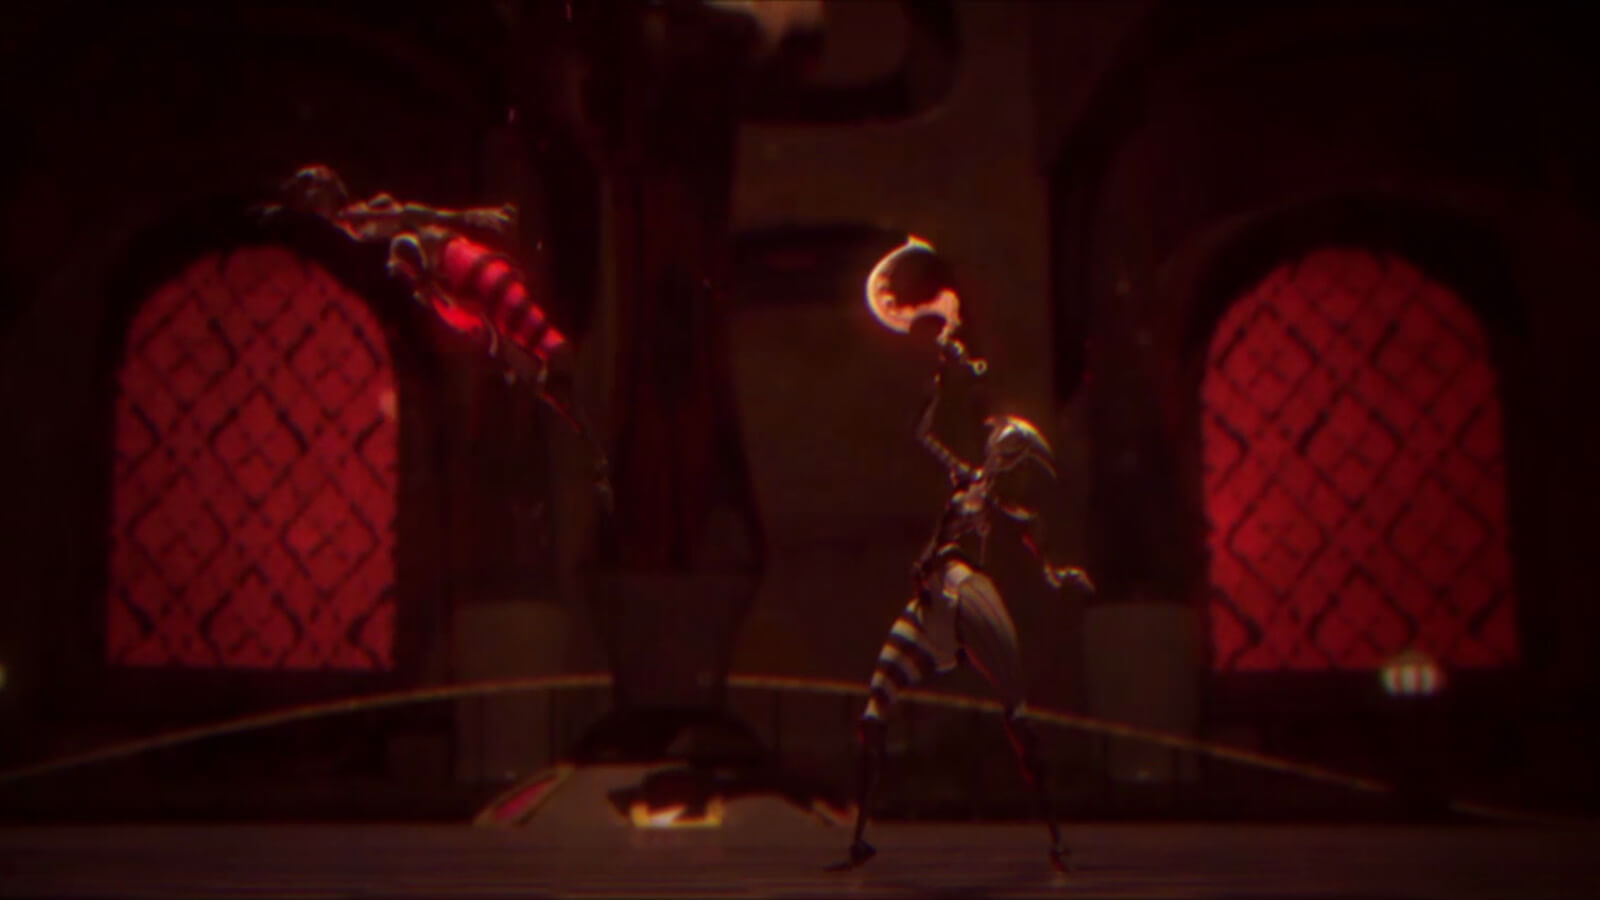 Two figures battle in a dimly lit arena room. One raises a melee weapon while the other flies through the air backward.